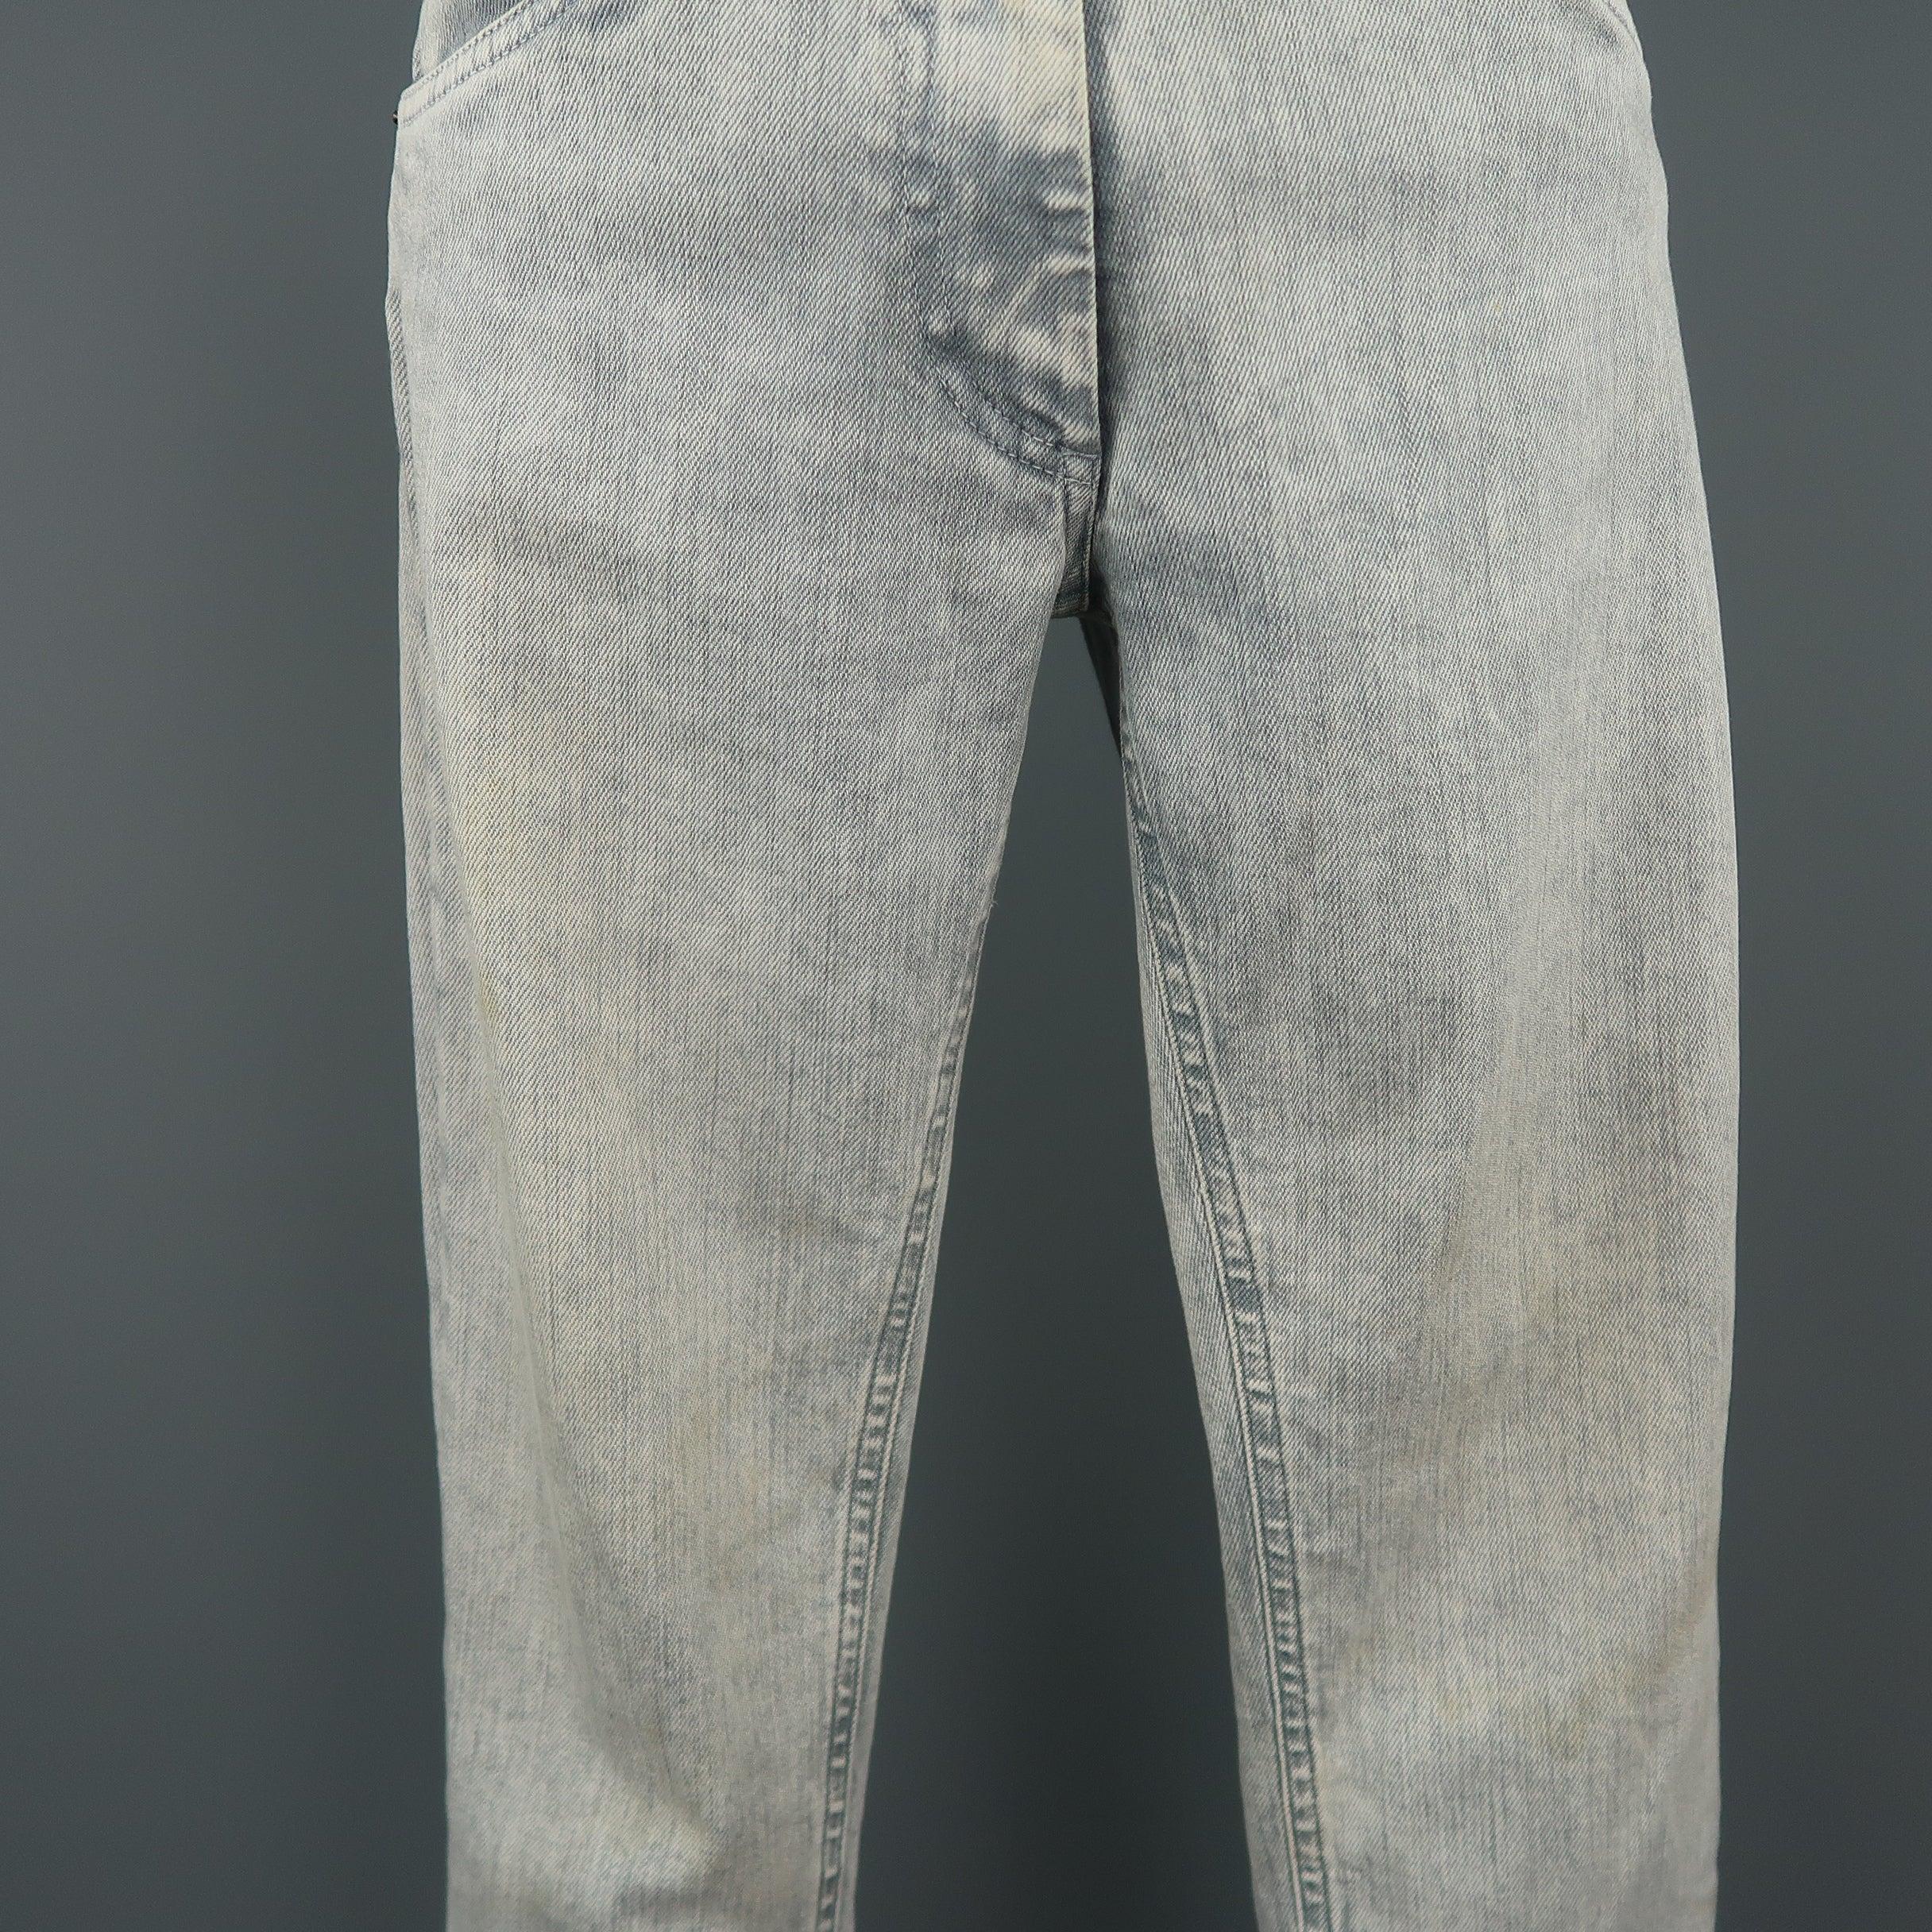 MAISON MARTIN MARGIELA Size 6 Light Grey Acid Wash Skinny Jeans In Fair Condition For Sale In San Francisco, CA